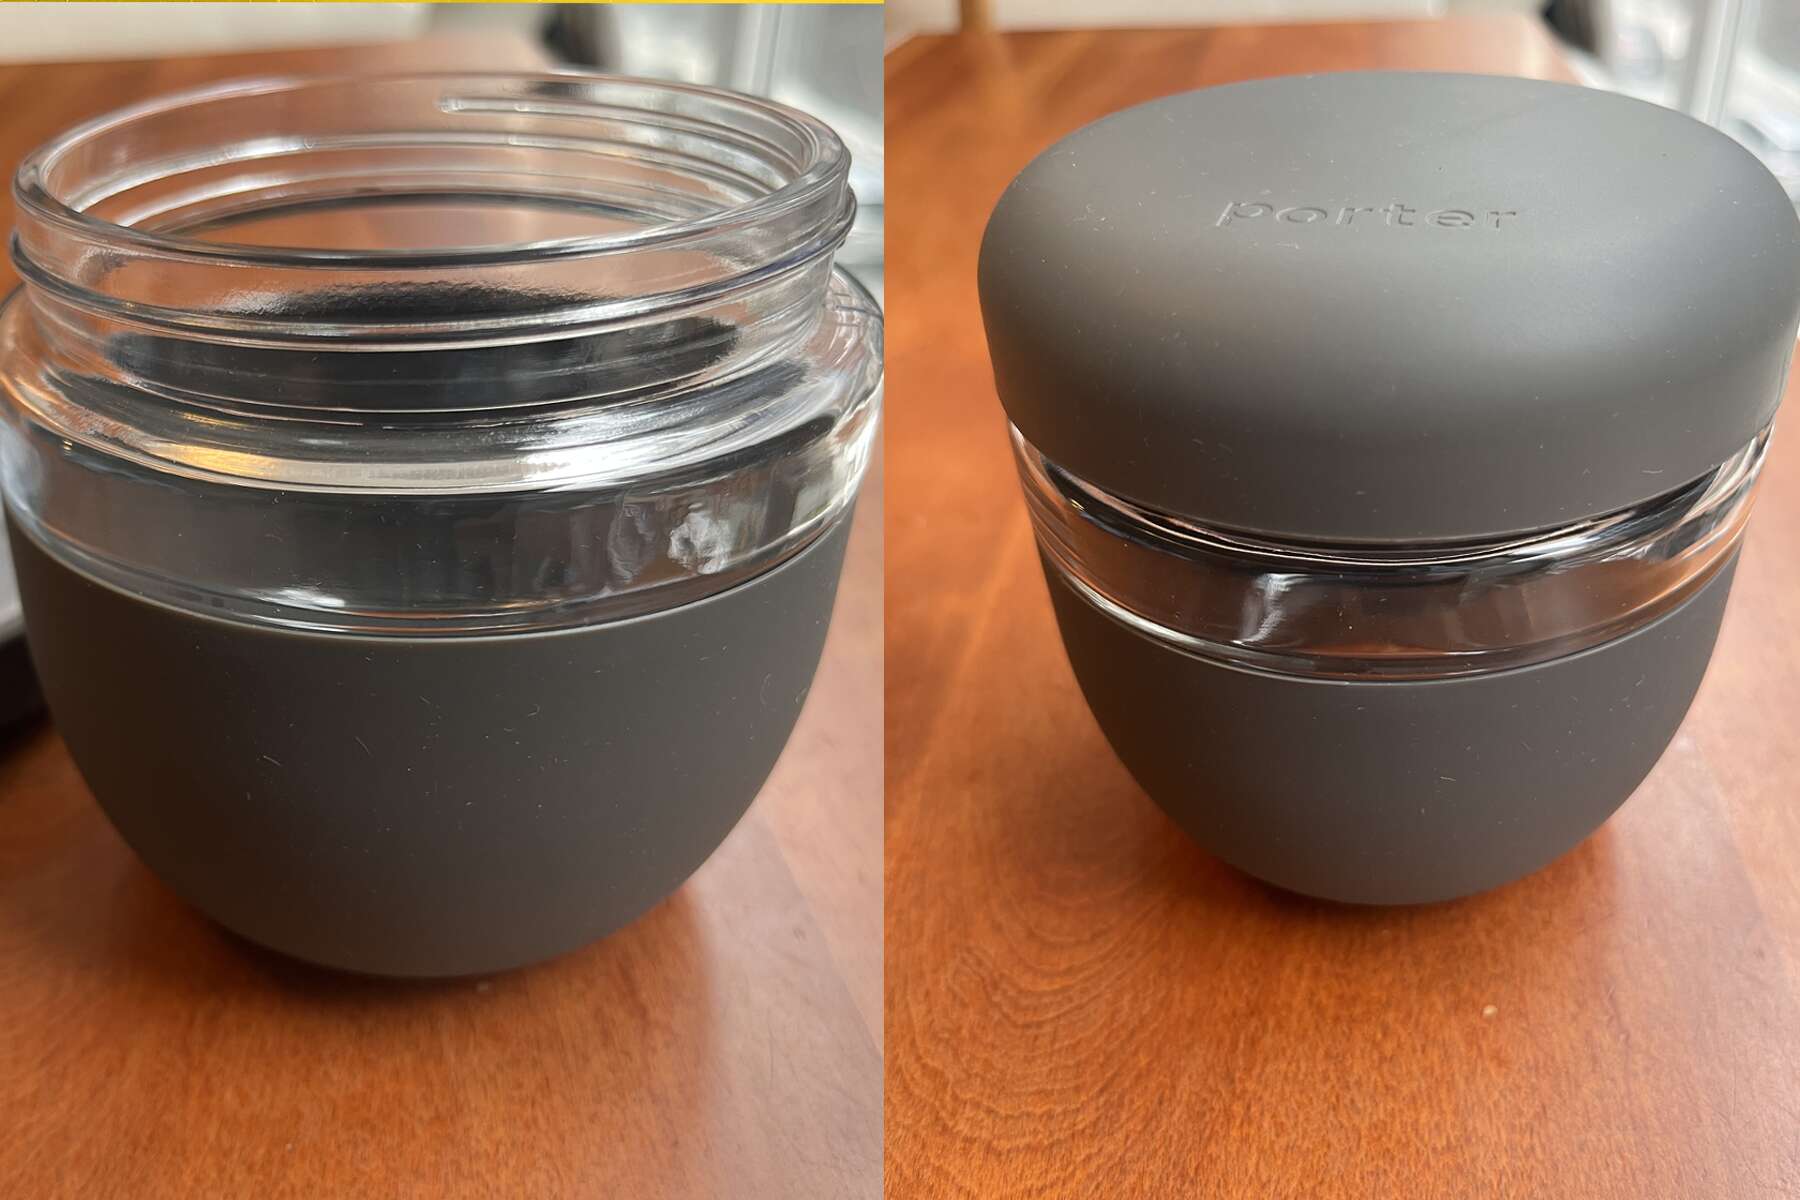 W&P Porter bowl review: This sealed container makes lunchtime a breeze